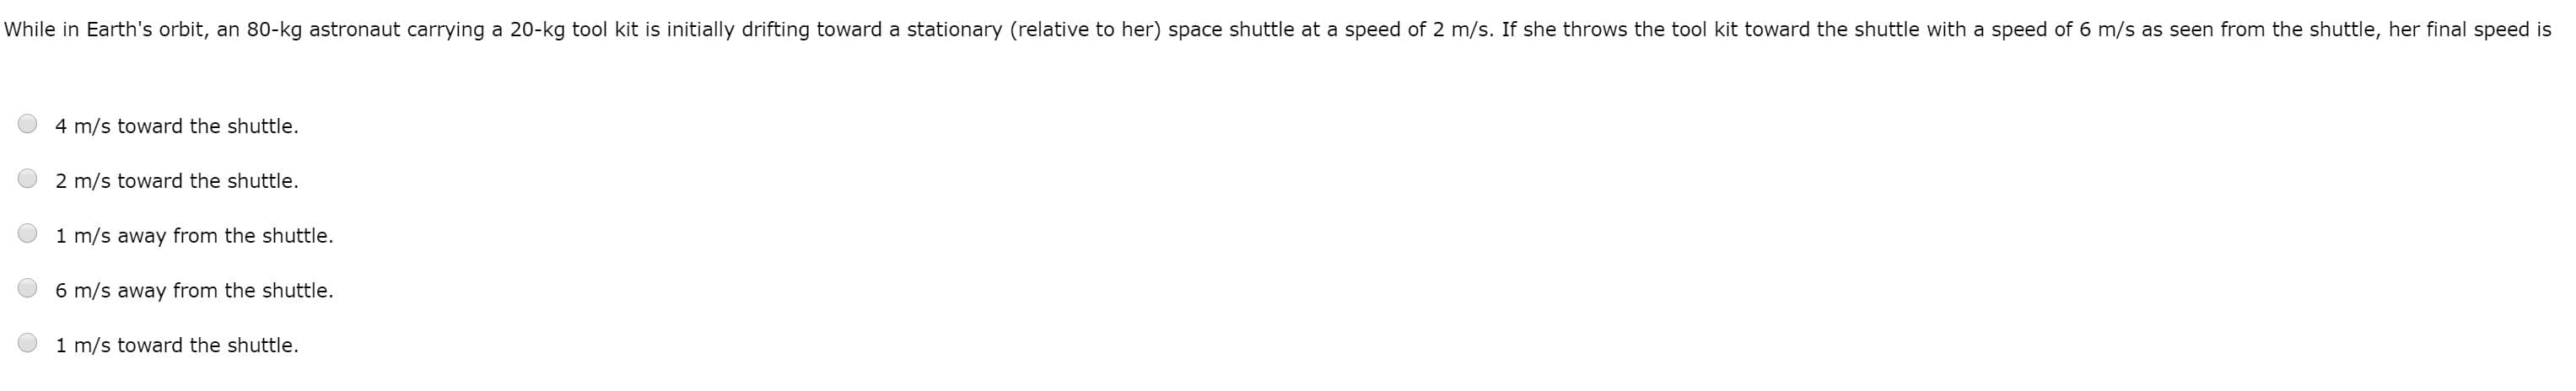 While in Earth's orbit, an 80-kg astronaut carrying a 20-kg tool kit is initially drifting toward a stationary (relative to her) space shuttle at a speed of 2 m/s. If she throws the tool kit toward the shuttle with a speed of 6 m/s as seen from the shuttle, her final speed is
